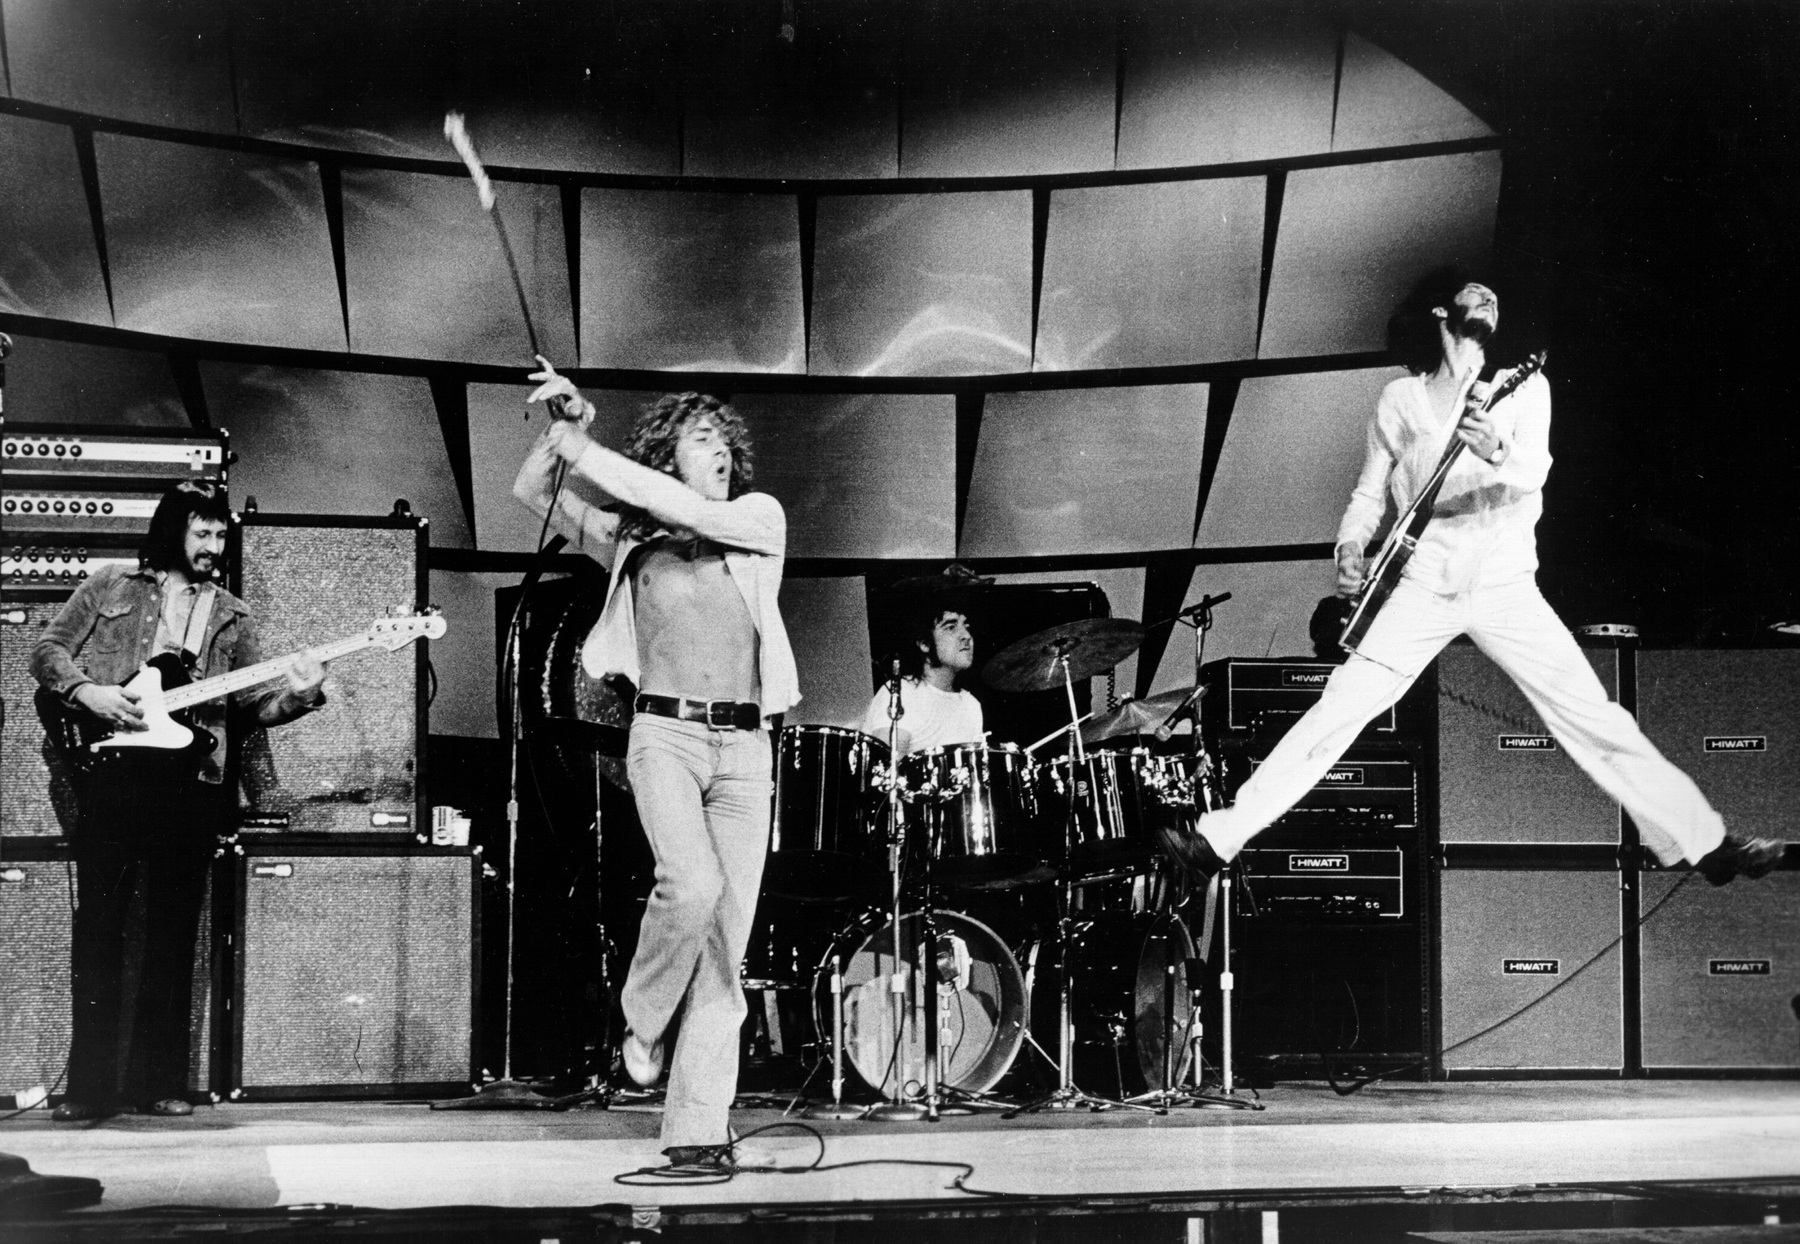 rs-27868-20131118-thewho-x1800-1384806180.jpg